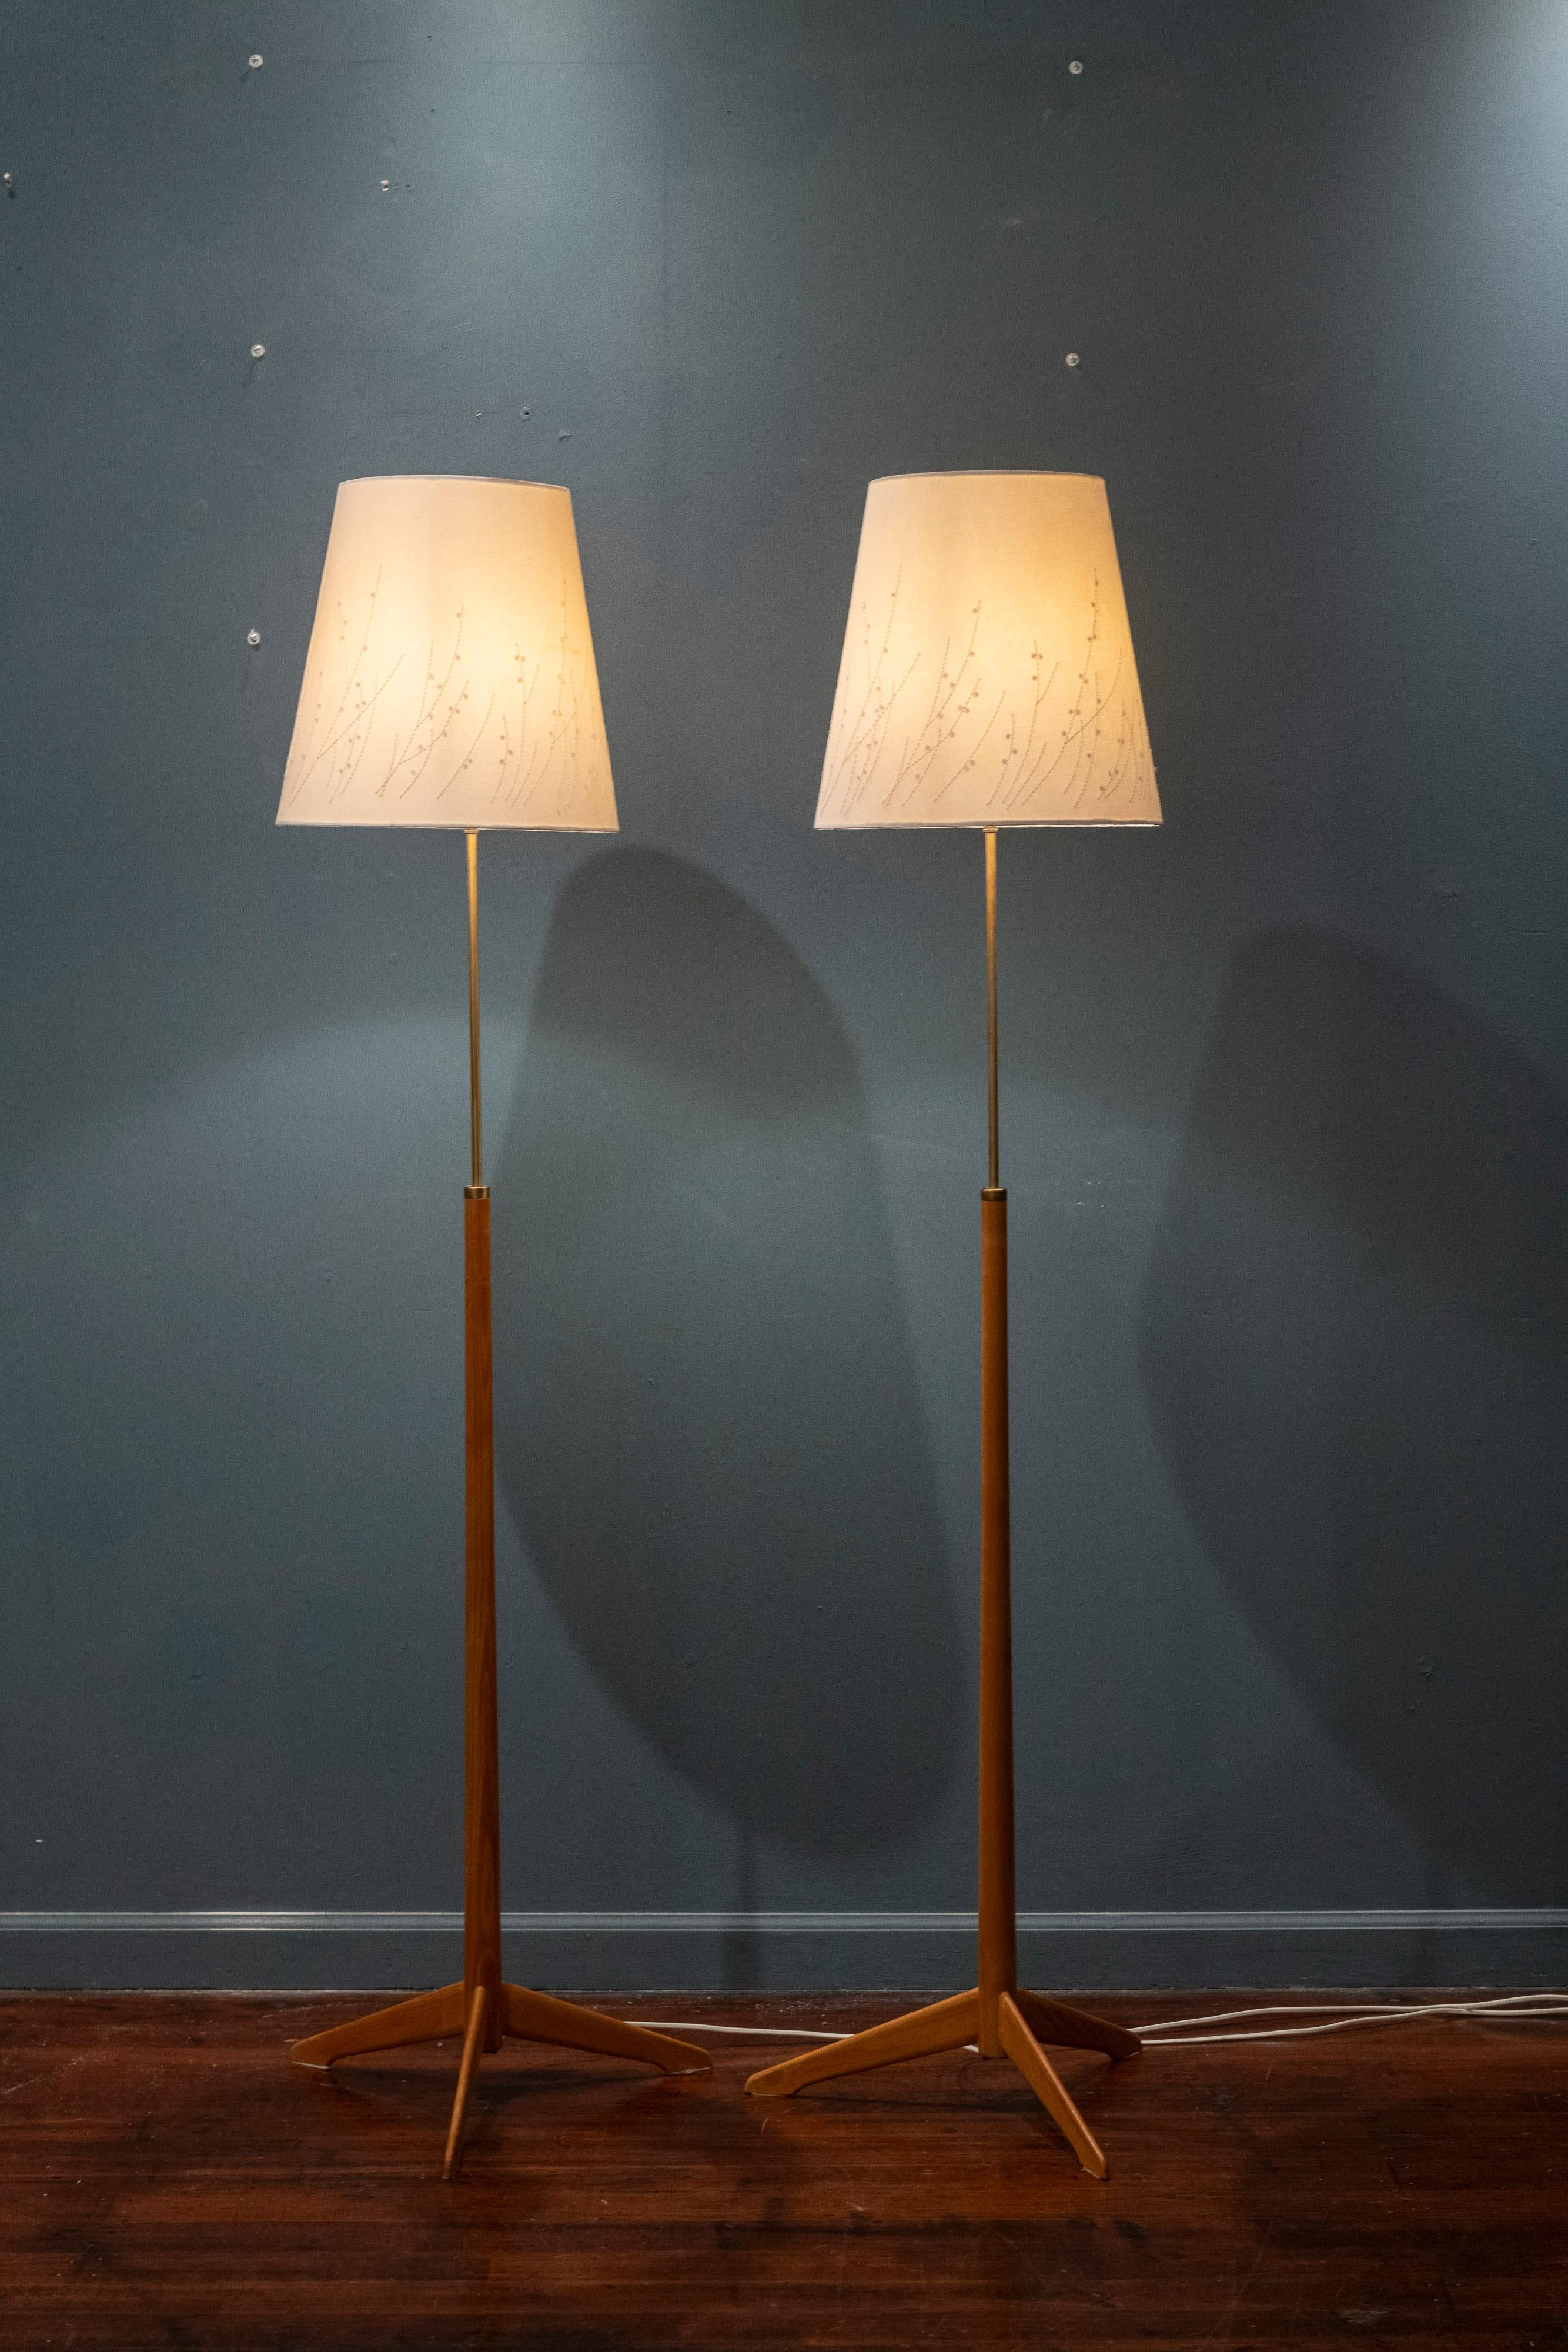 Scandinavian Modern floor lamps by Alf Svensson for Berboms, Model G-34 Sweden. Simple modern design floor lamps made from oak and brass that are light and elegant. Embroidered shades are included in good used condition that present very well. Lamps